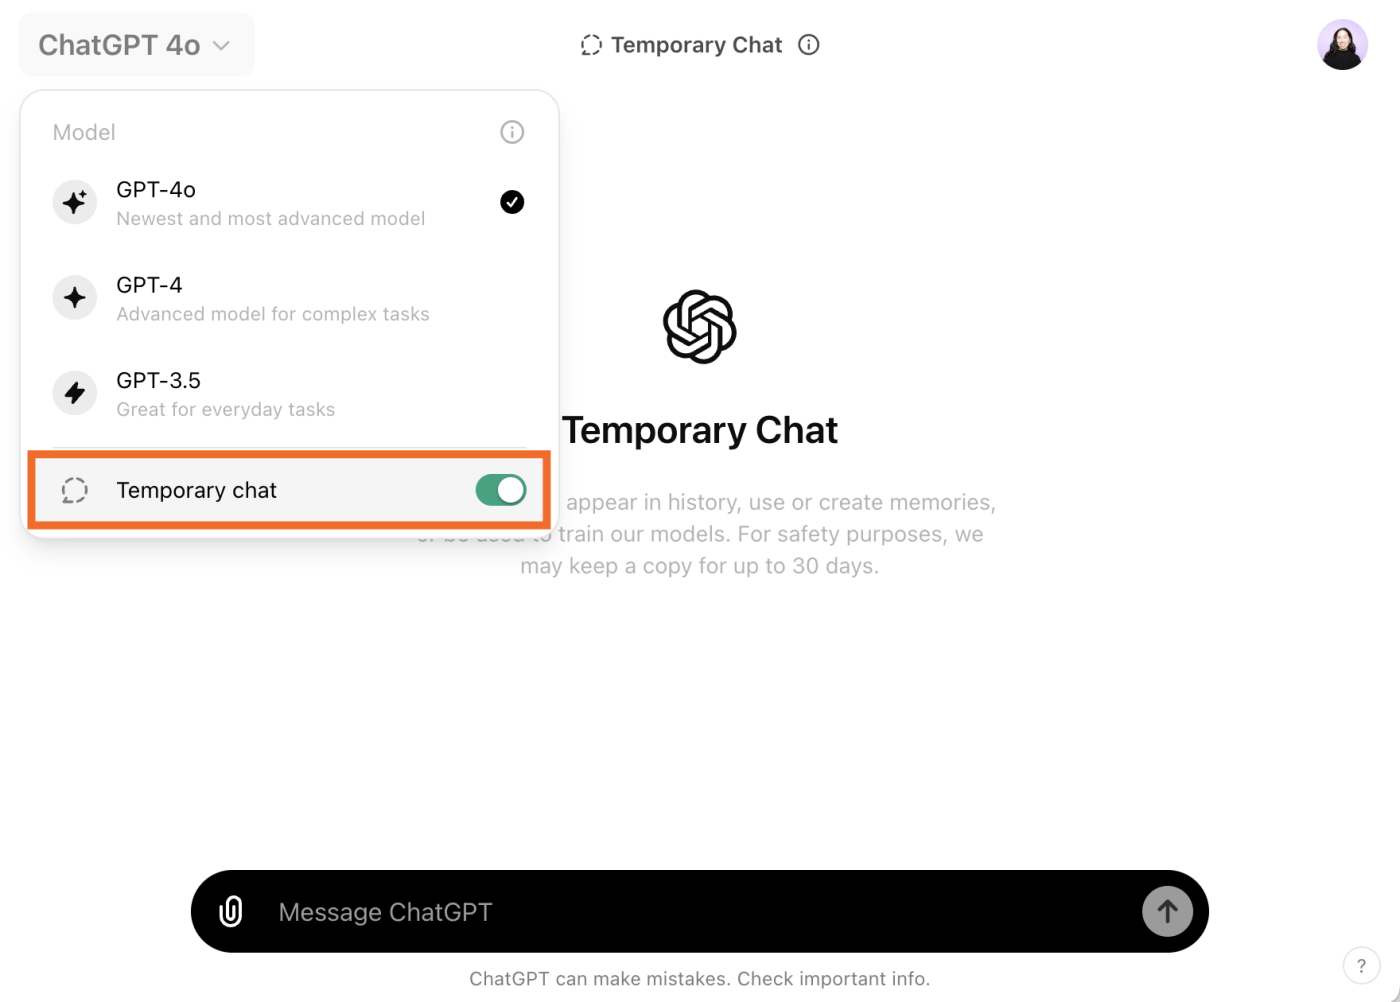 ChatGPT conversation with an expanded view of the model dropdown and the temporary chat enabled.